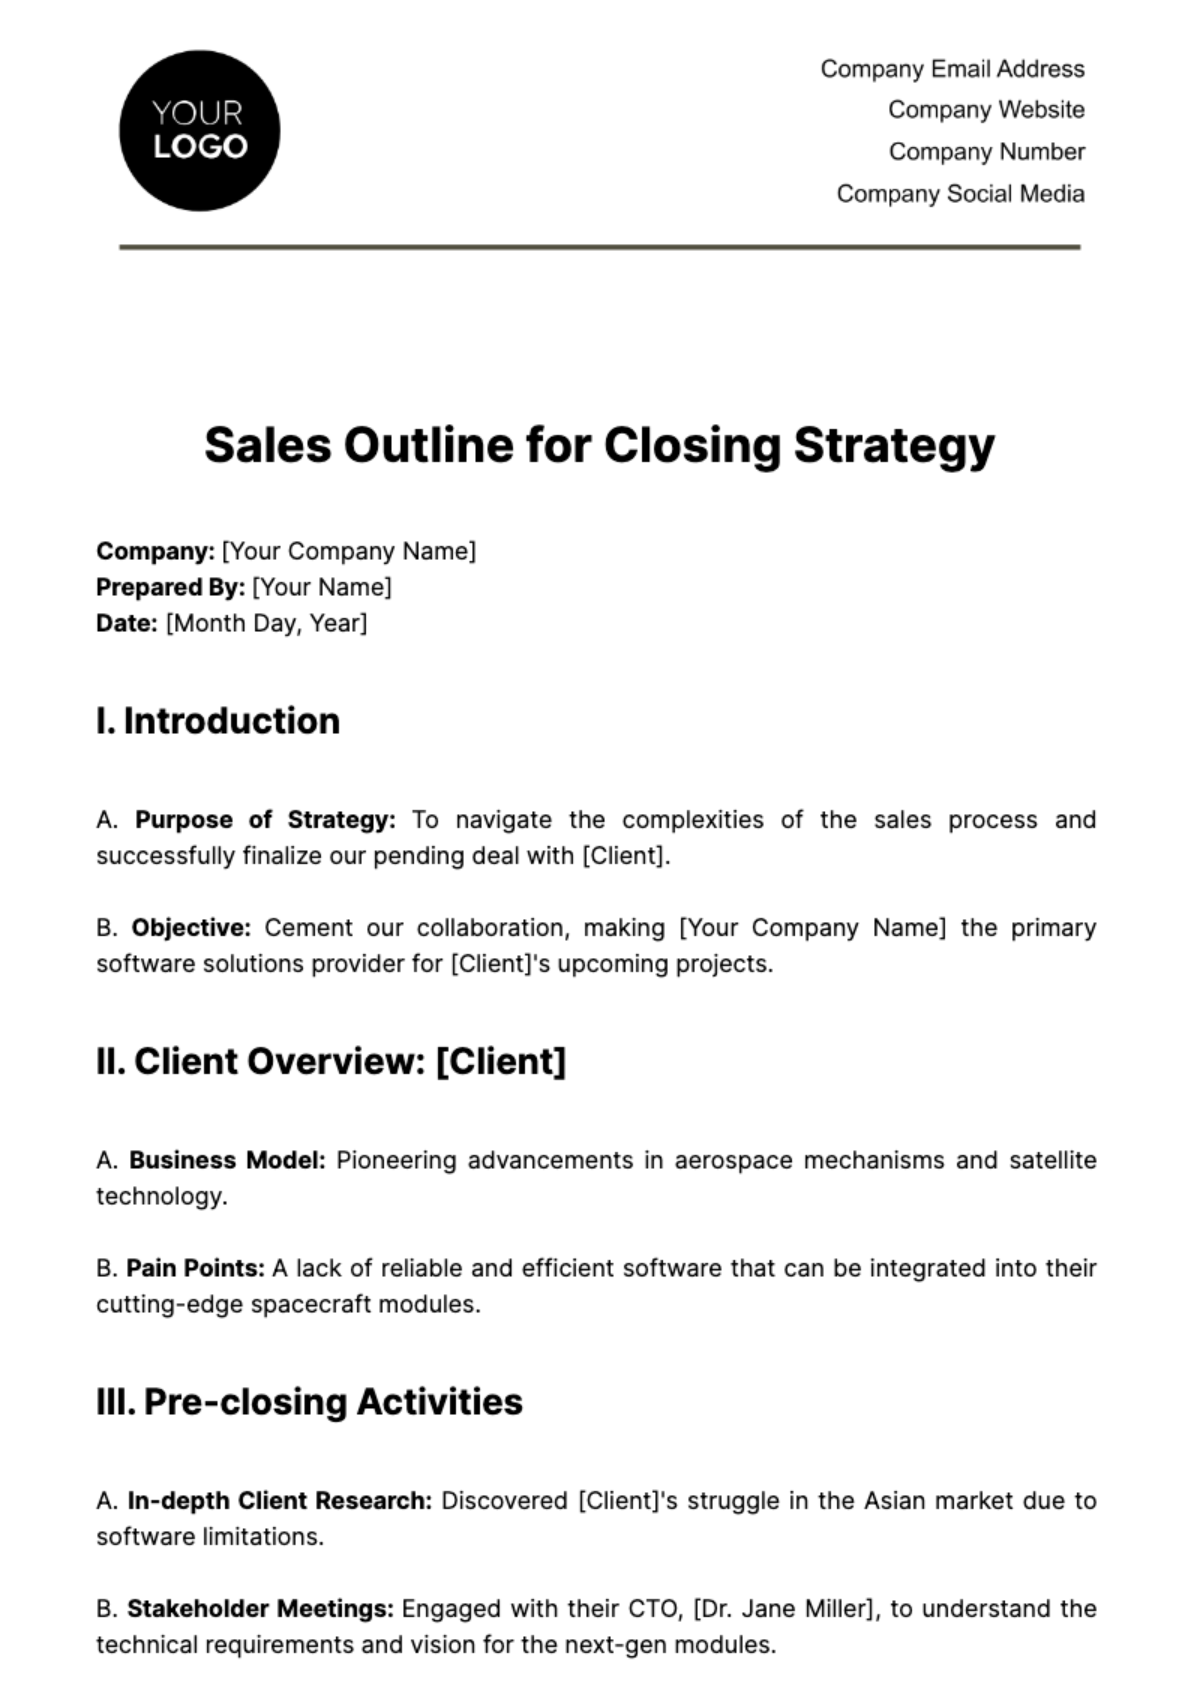 Sales Outline for Closing Strategy Template